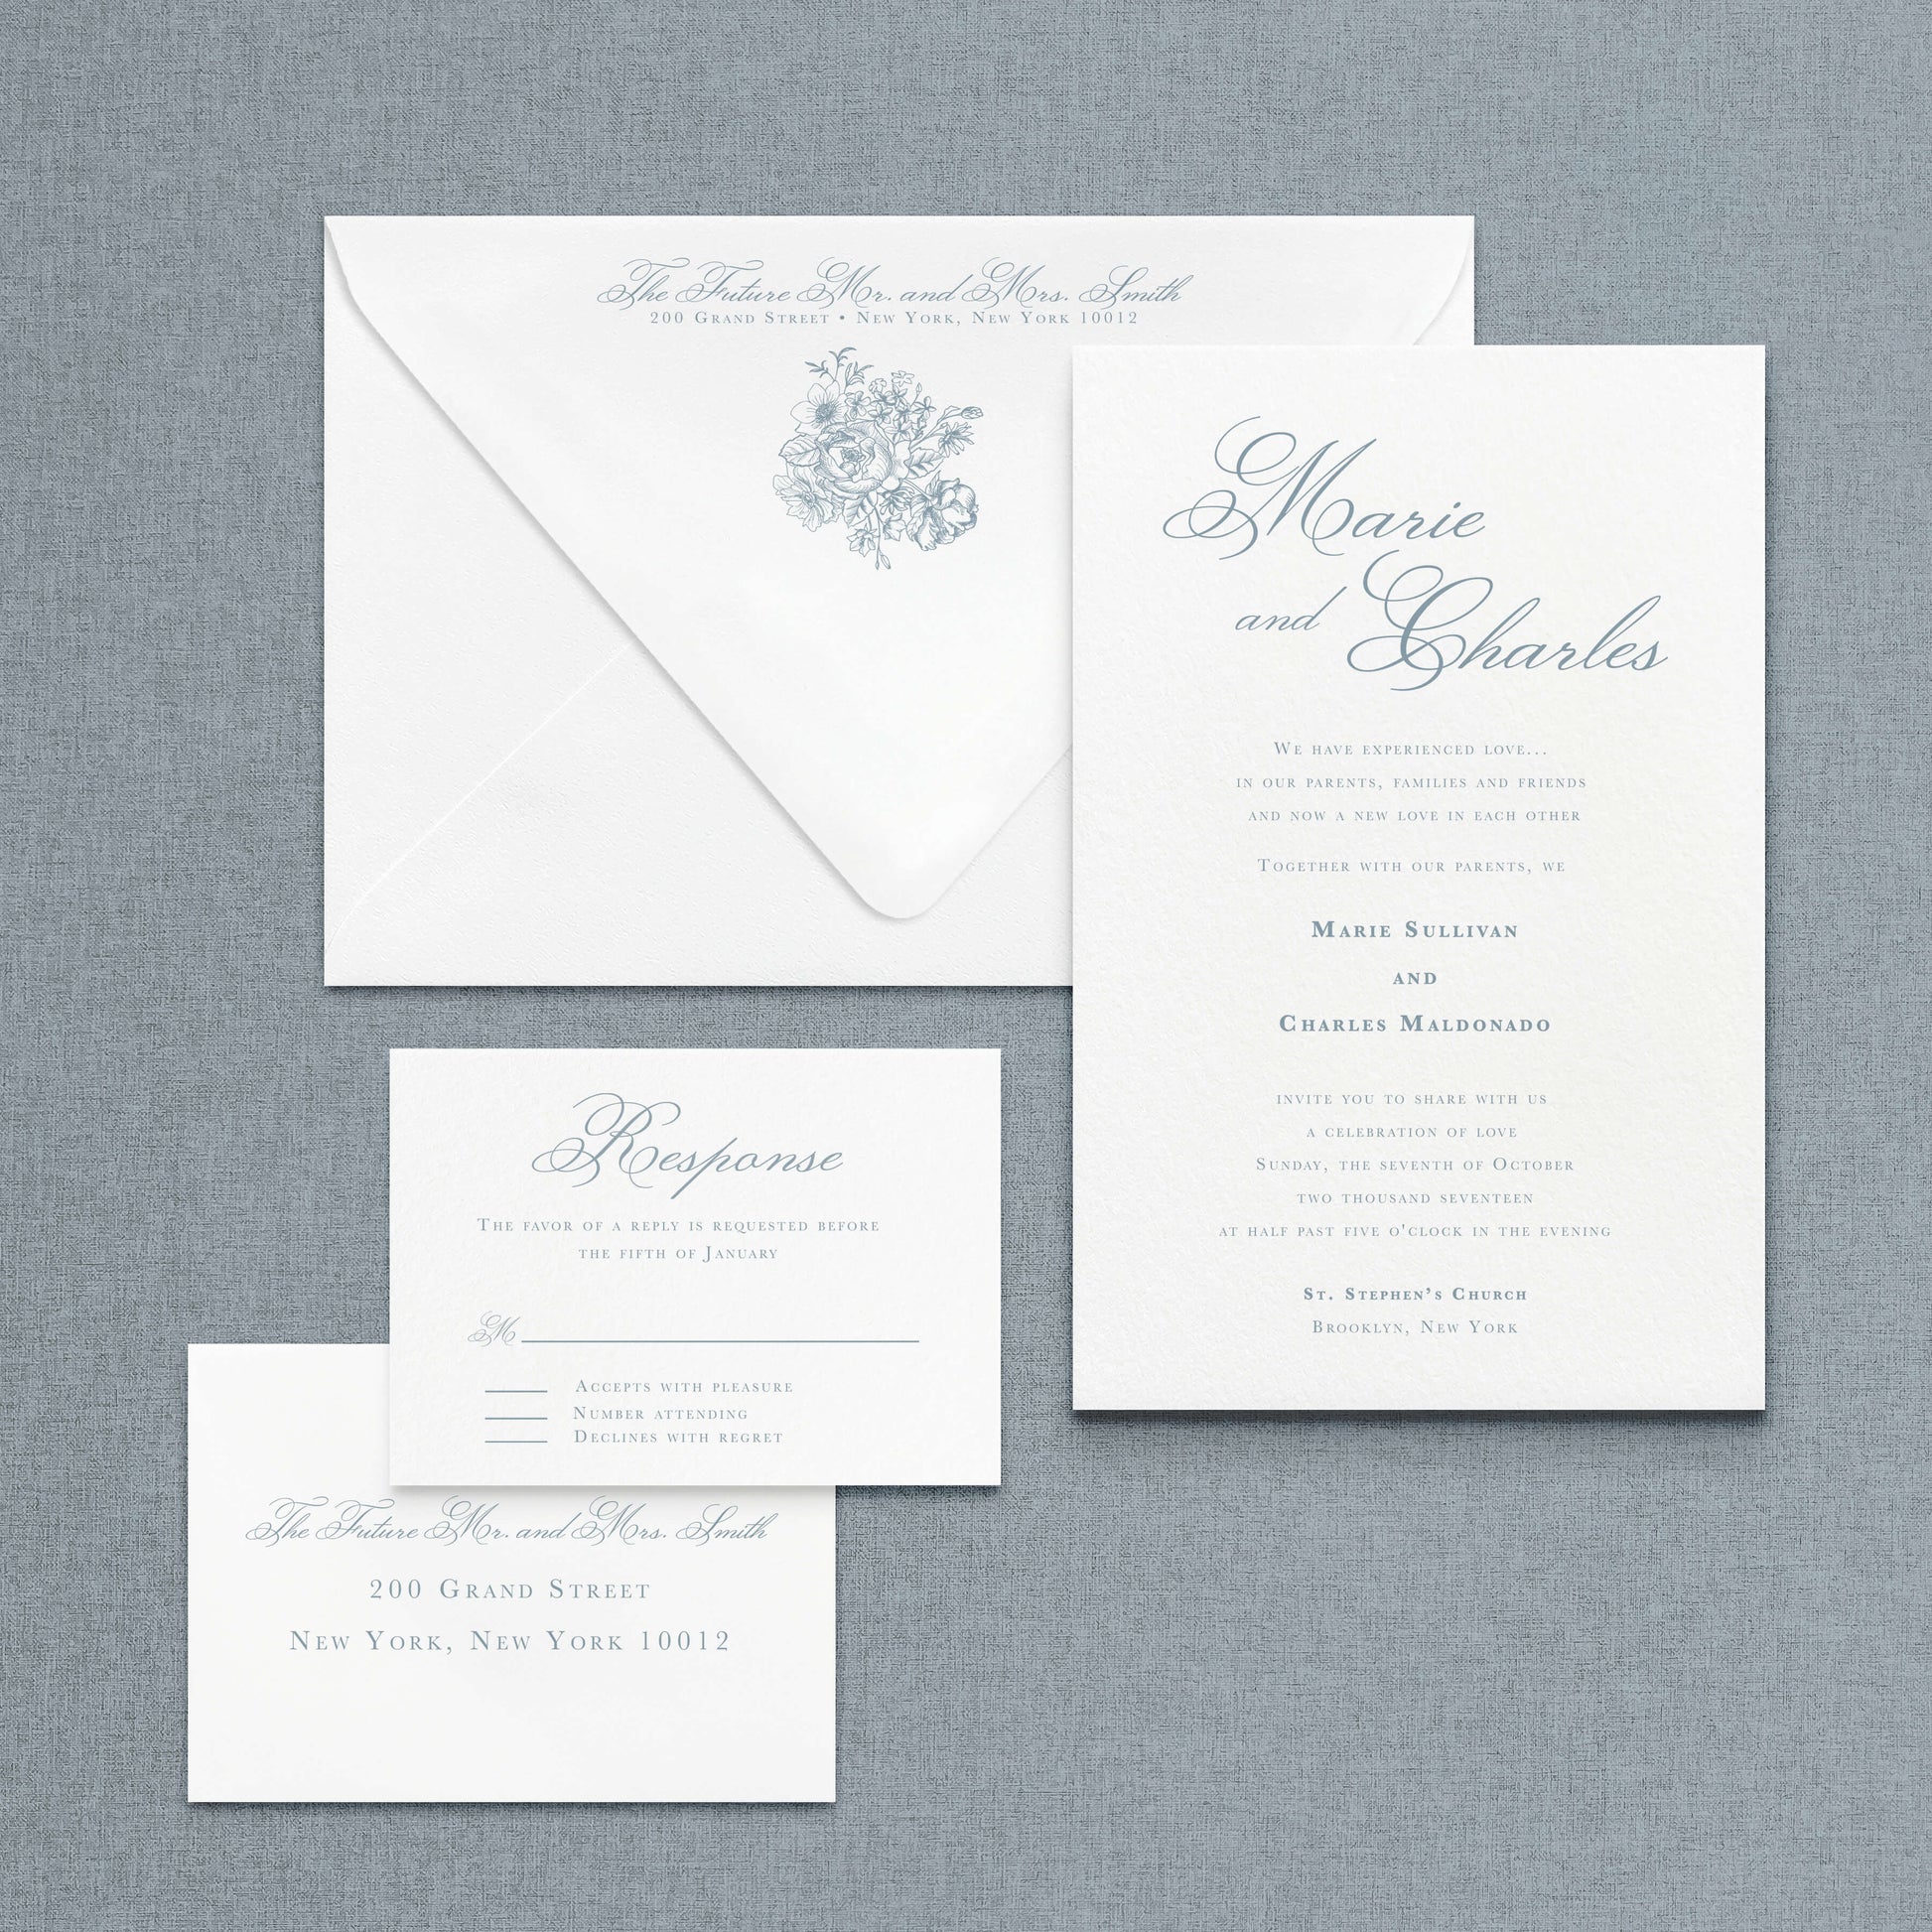 Dusty Blue wedding Invitation Suite including an A9 Invitation Card, A9 envelope, RSVP card, and RSVP envelope